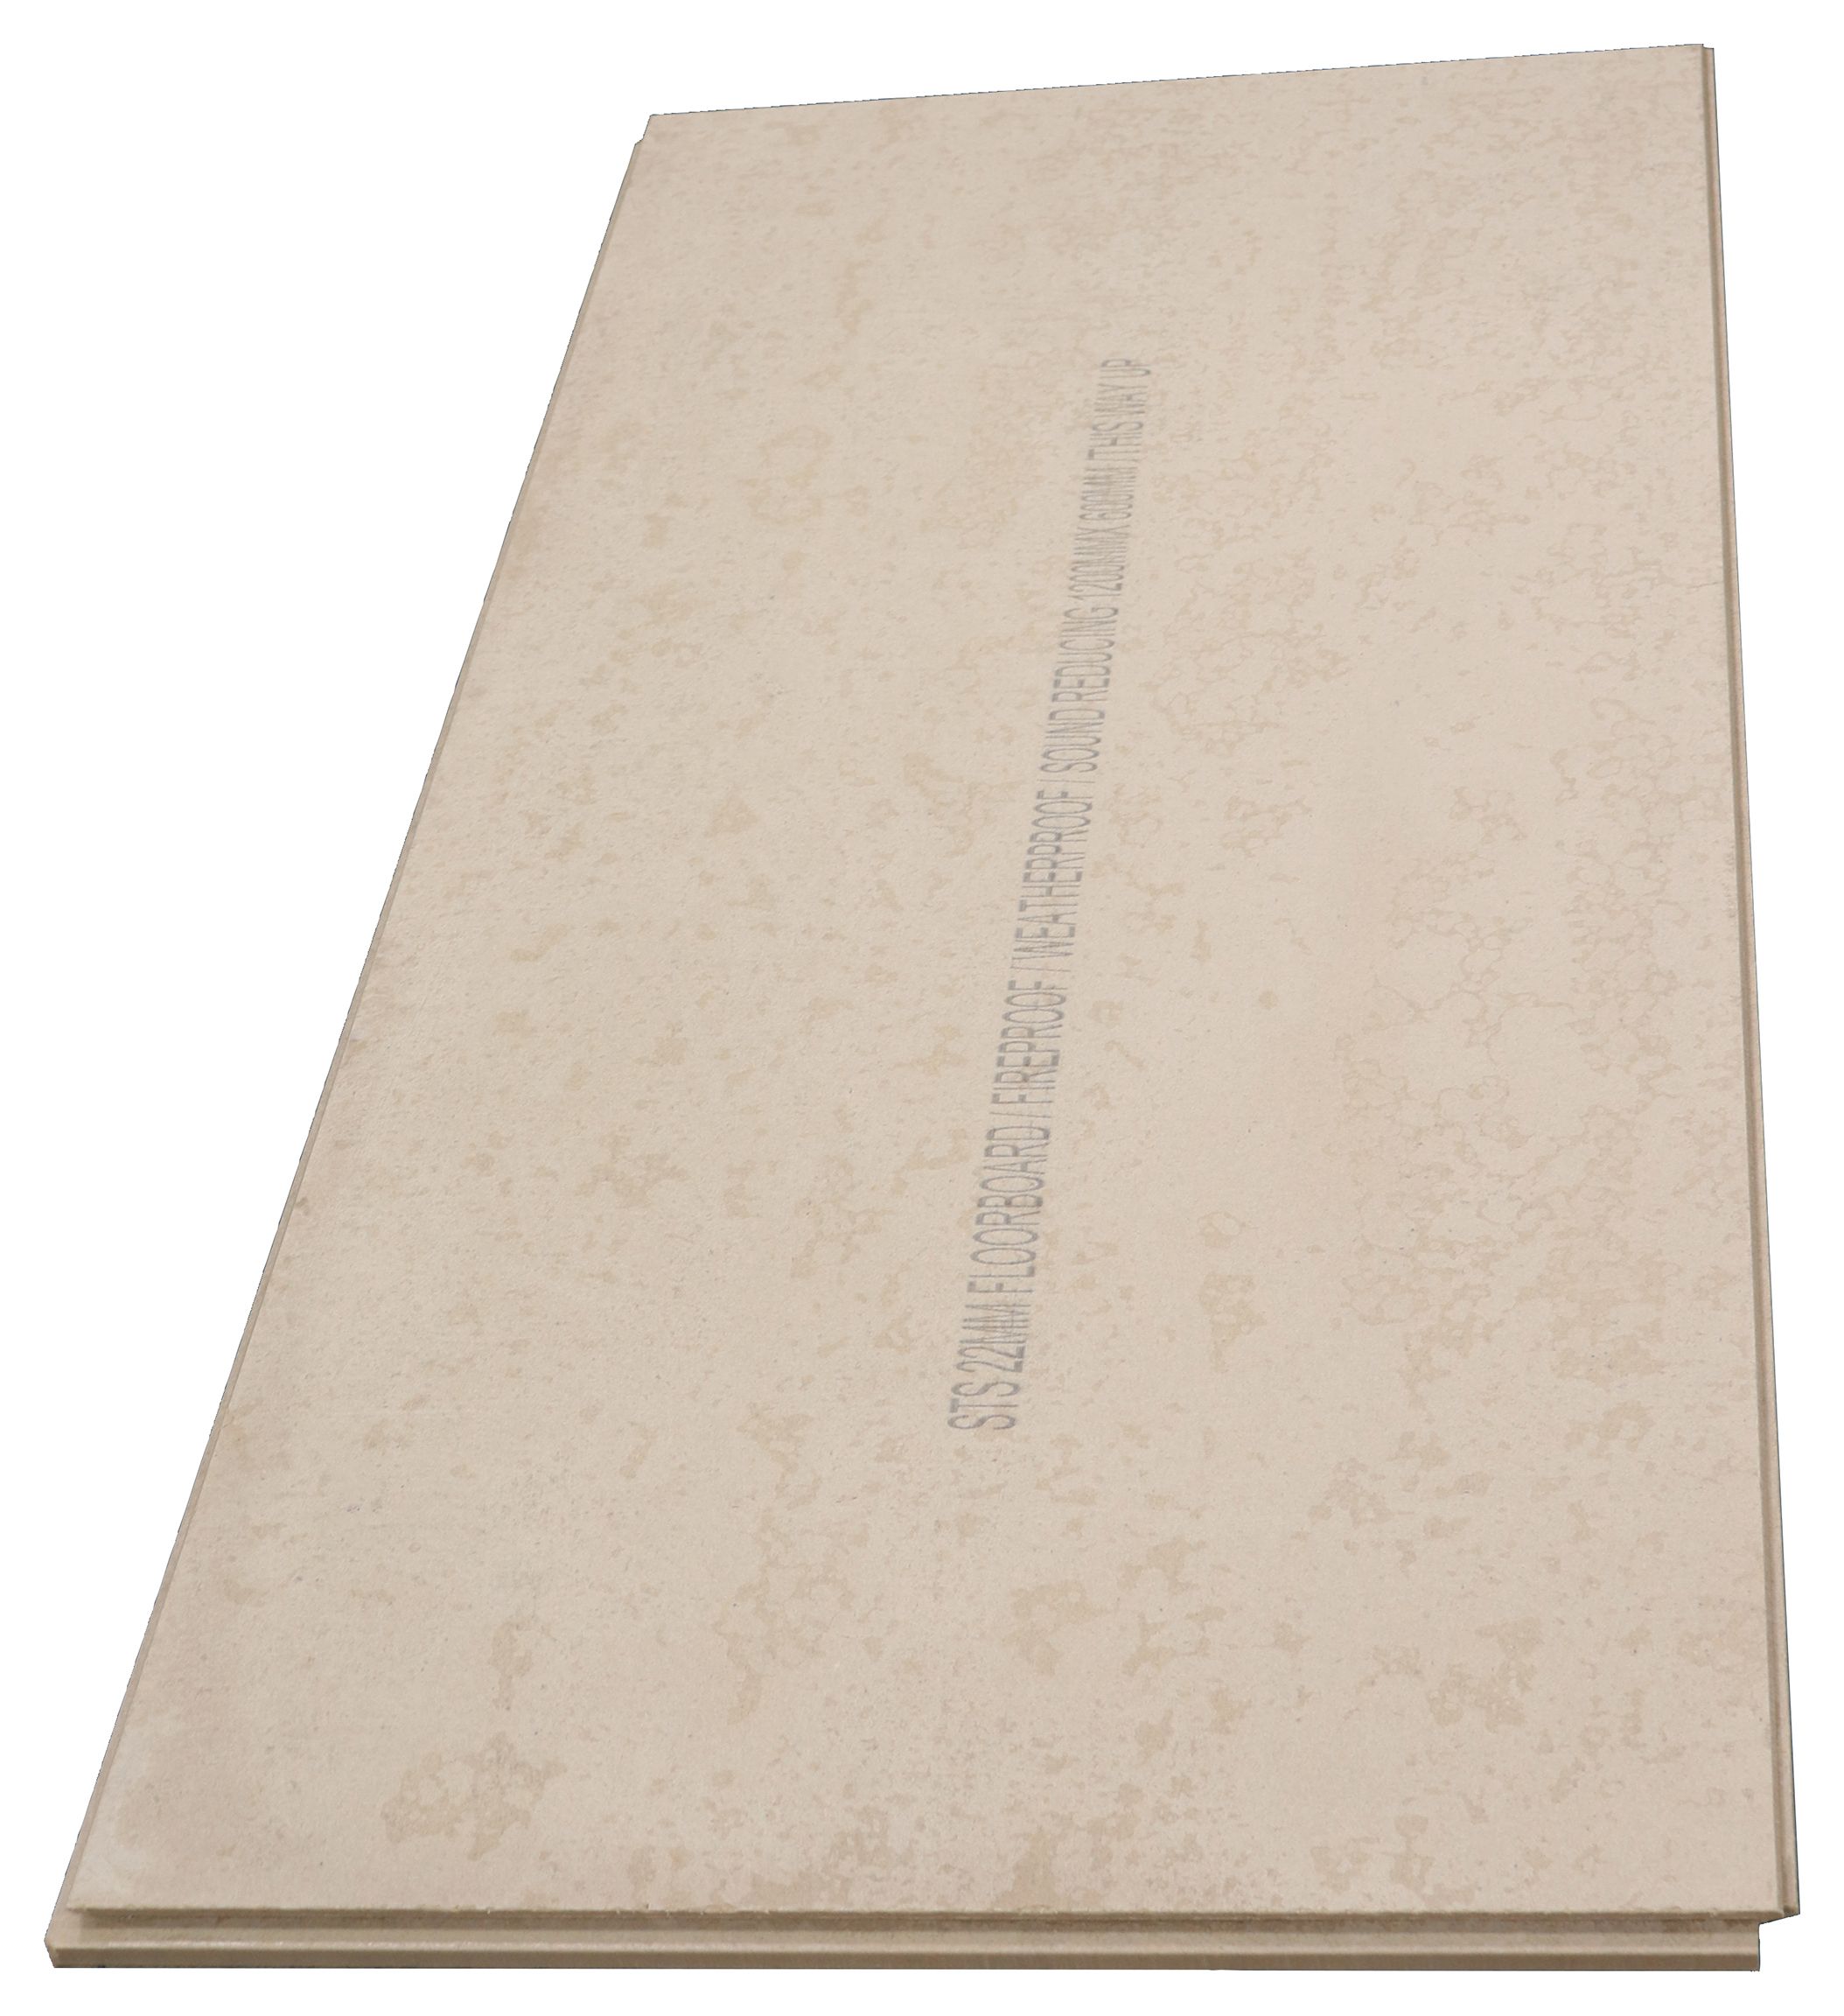 STS NoMorePly TG4 Tile Backer Floor Board - 1200 x 600 x 22mm - Pack of 40